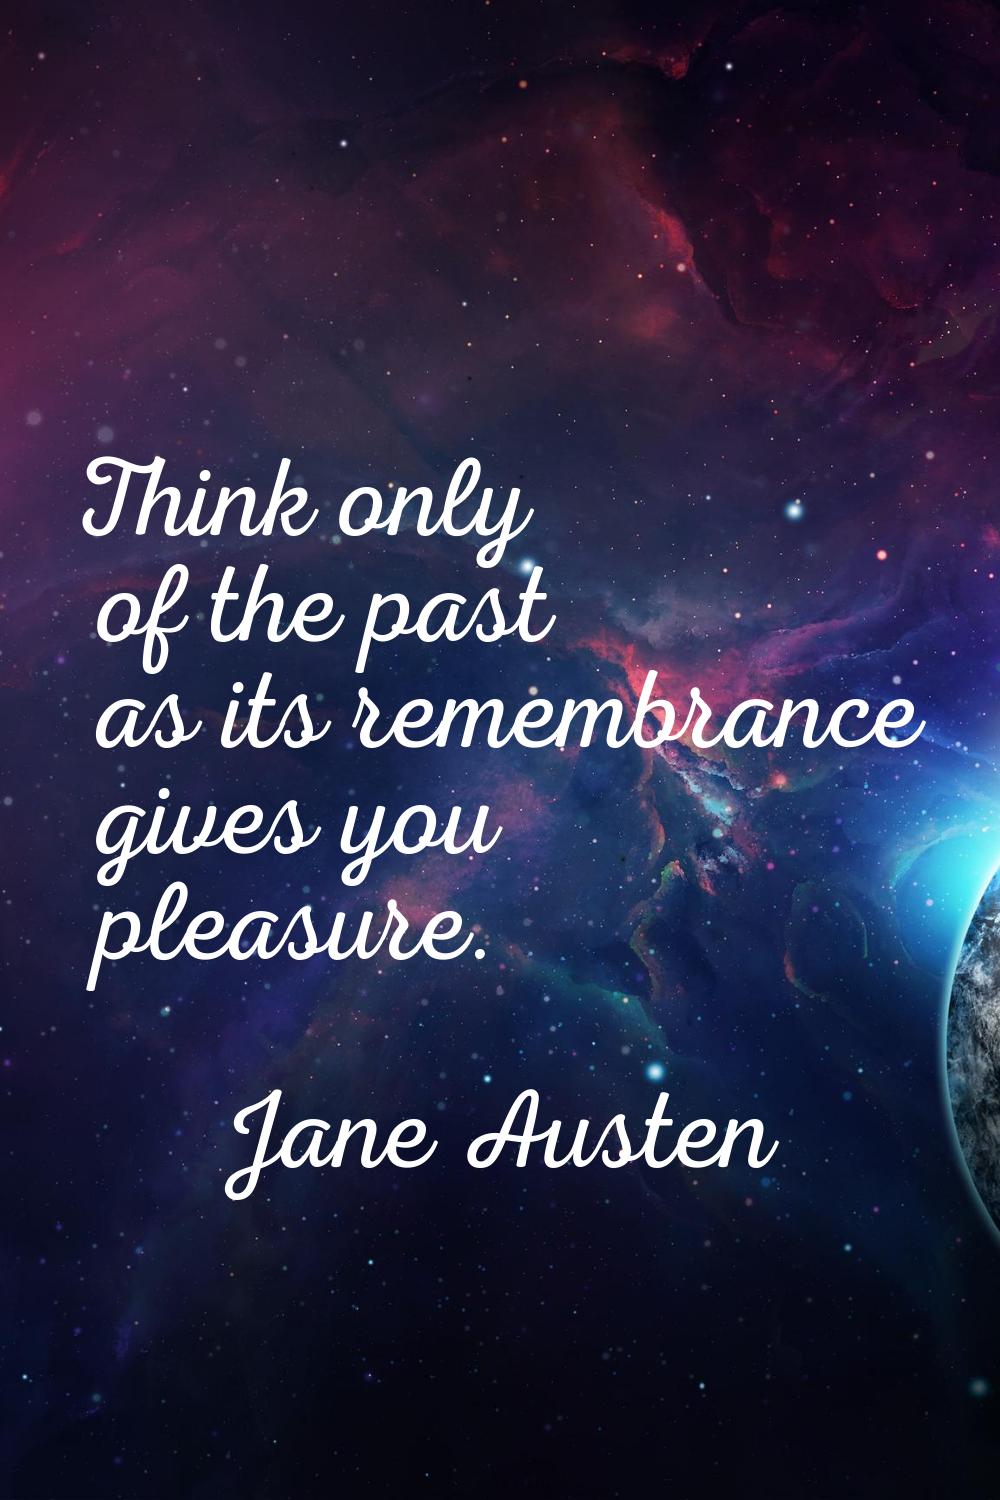 Think only of the past as its remembrance gives you pleasure.